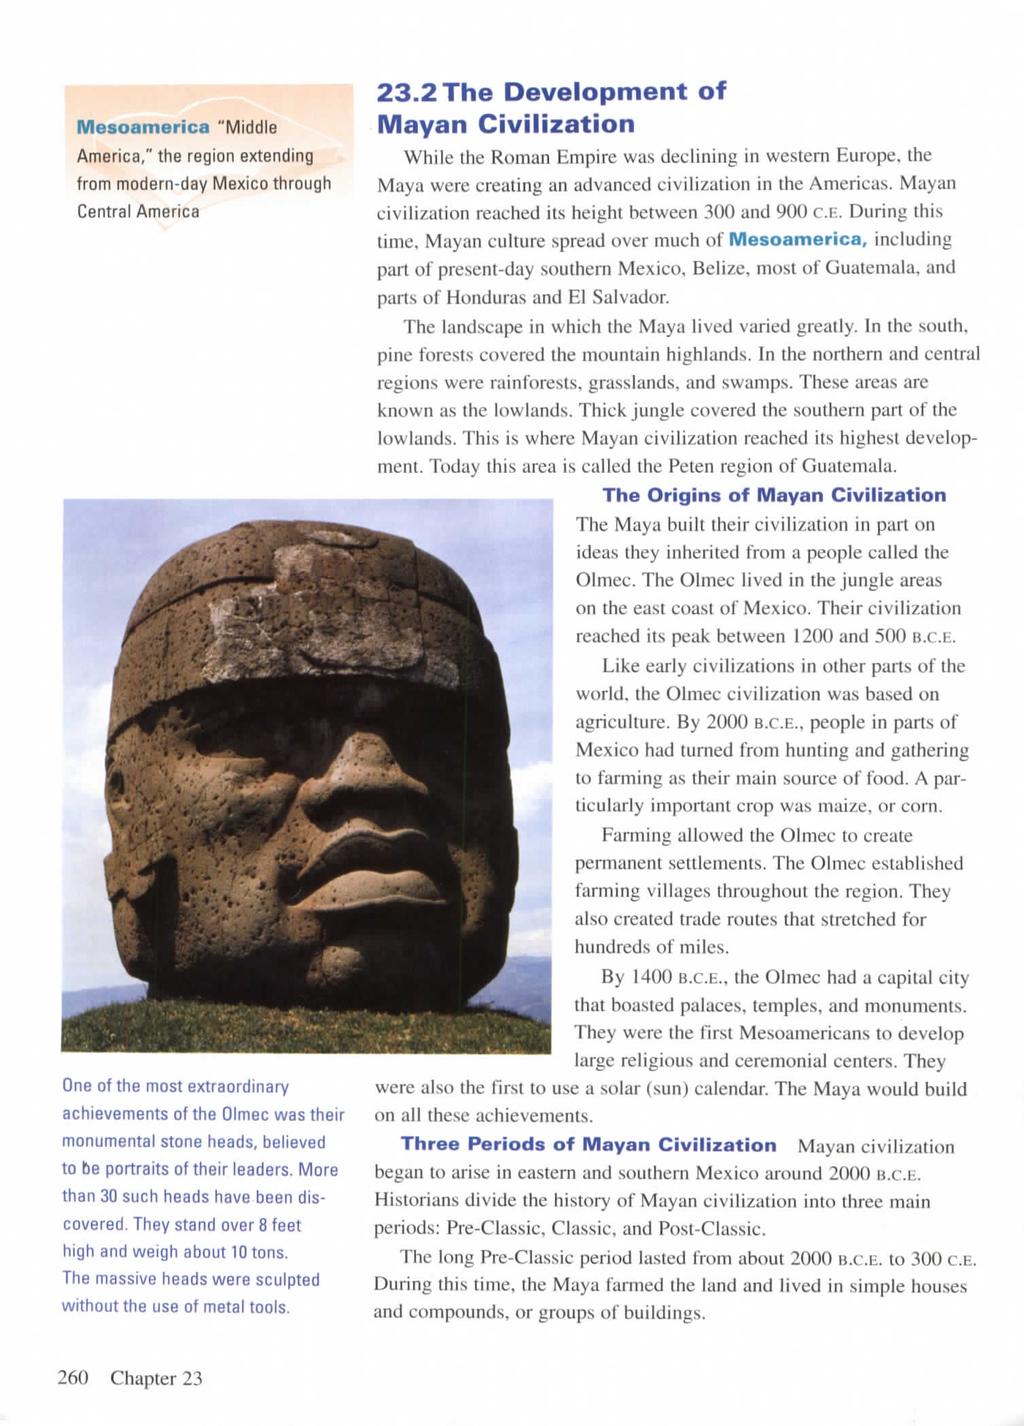 Mesoamerica "Middle America," the region extending from modern-day Mexico through Central America One of the most extraordinary achievements of the Olmec was their monumental stone heads, believed to